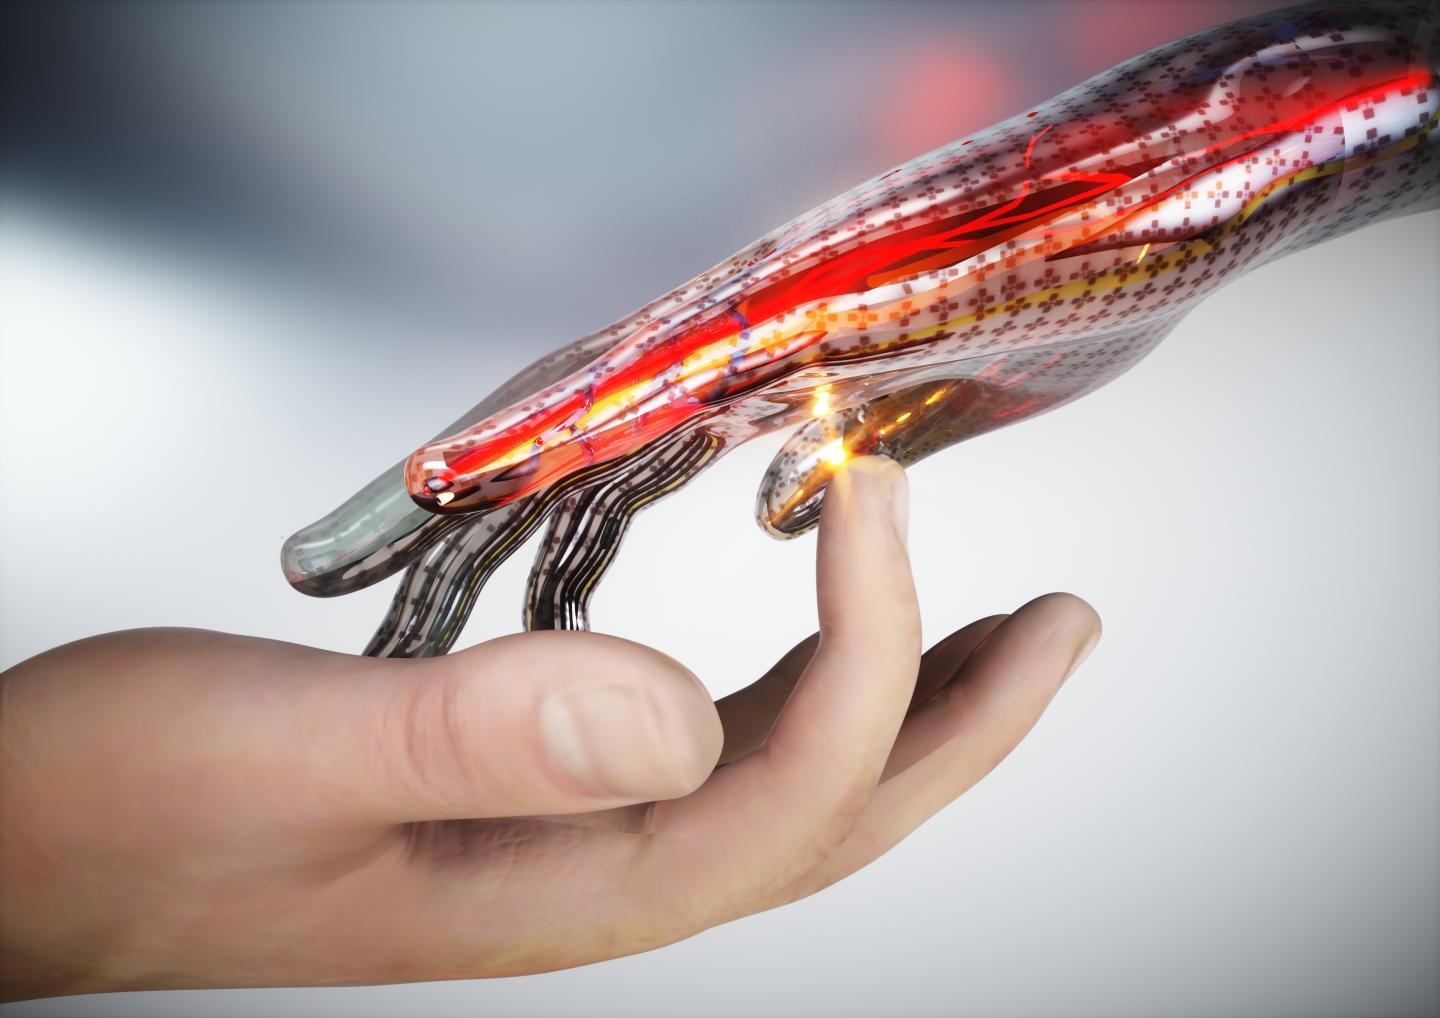 A concept image of electronic skin that can sense touch, pain, and heat.

CREDIT
Ella Maru Studio